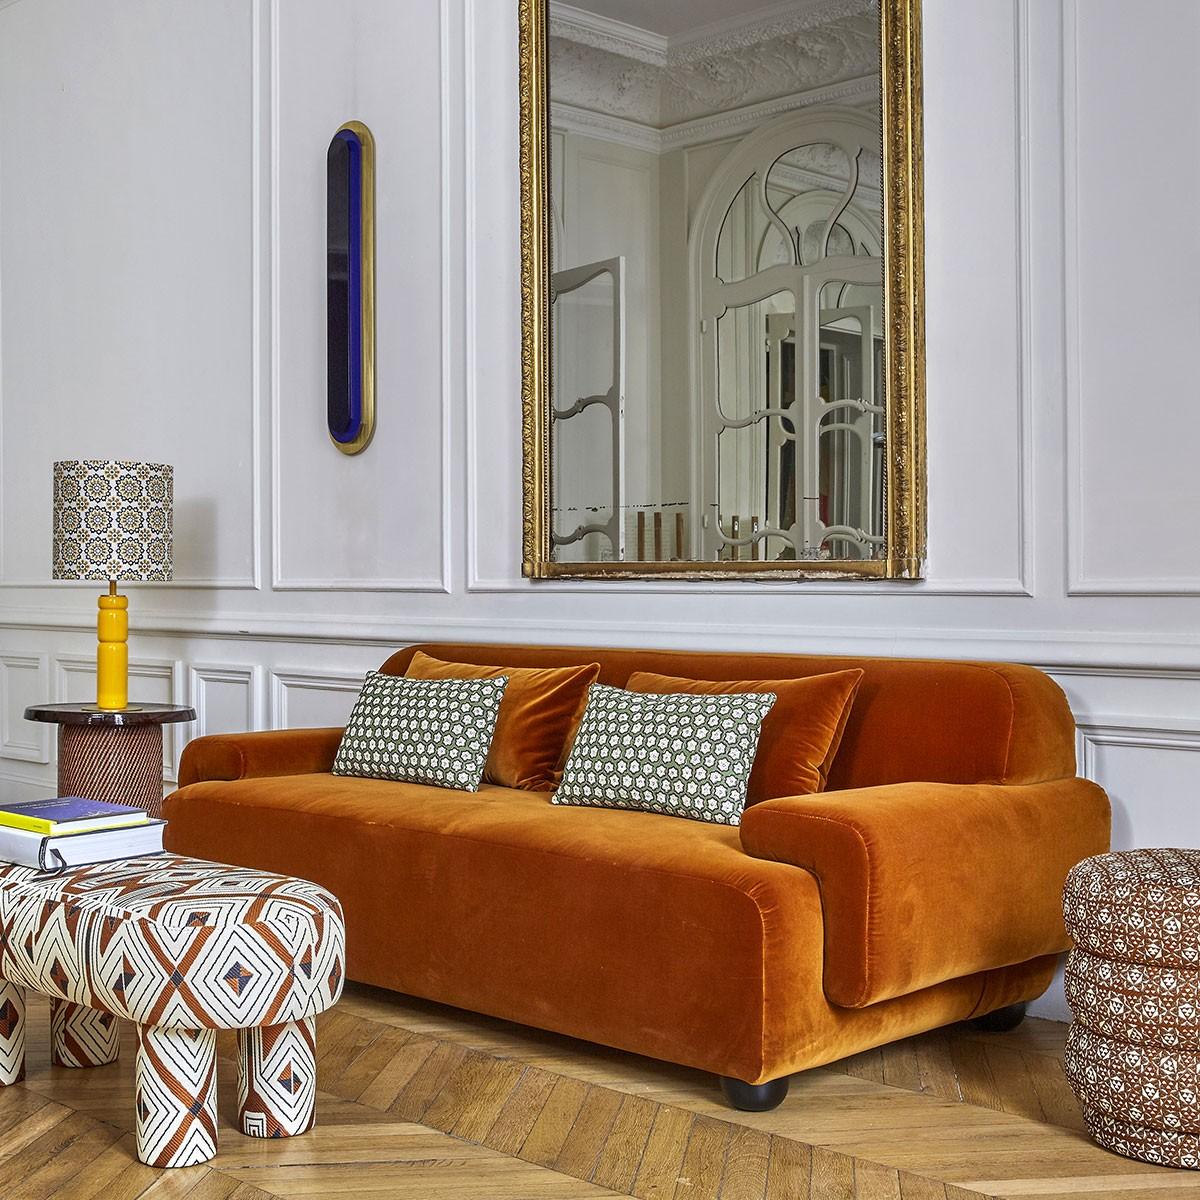 Popus editions Lena 4 seater sofa in rust megeve fabric with a knit effect.

It looks like it's straight out of a movie, with its generous curves and wide armrests. It is a real invitation to spend long Sundays with the family, comfortably seated